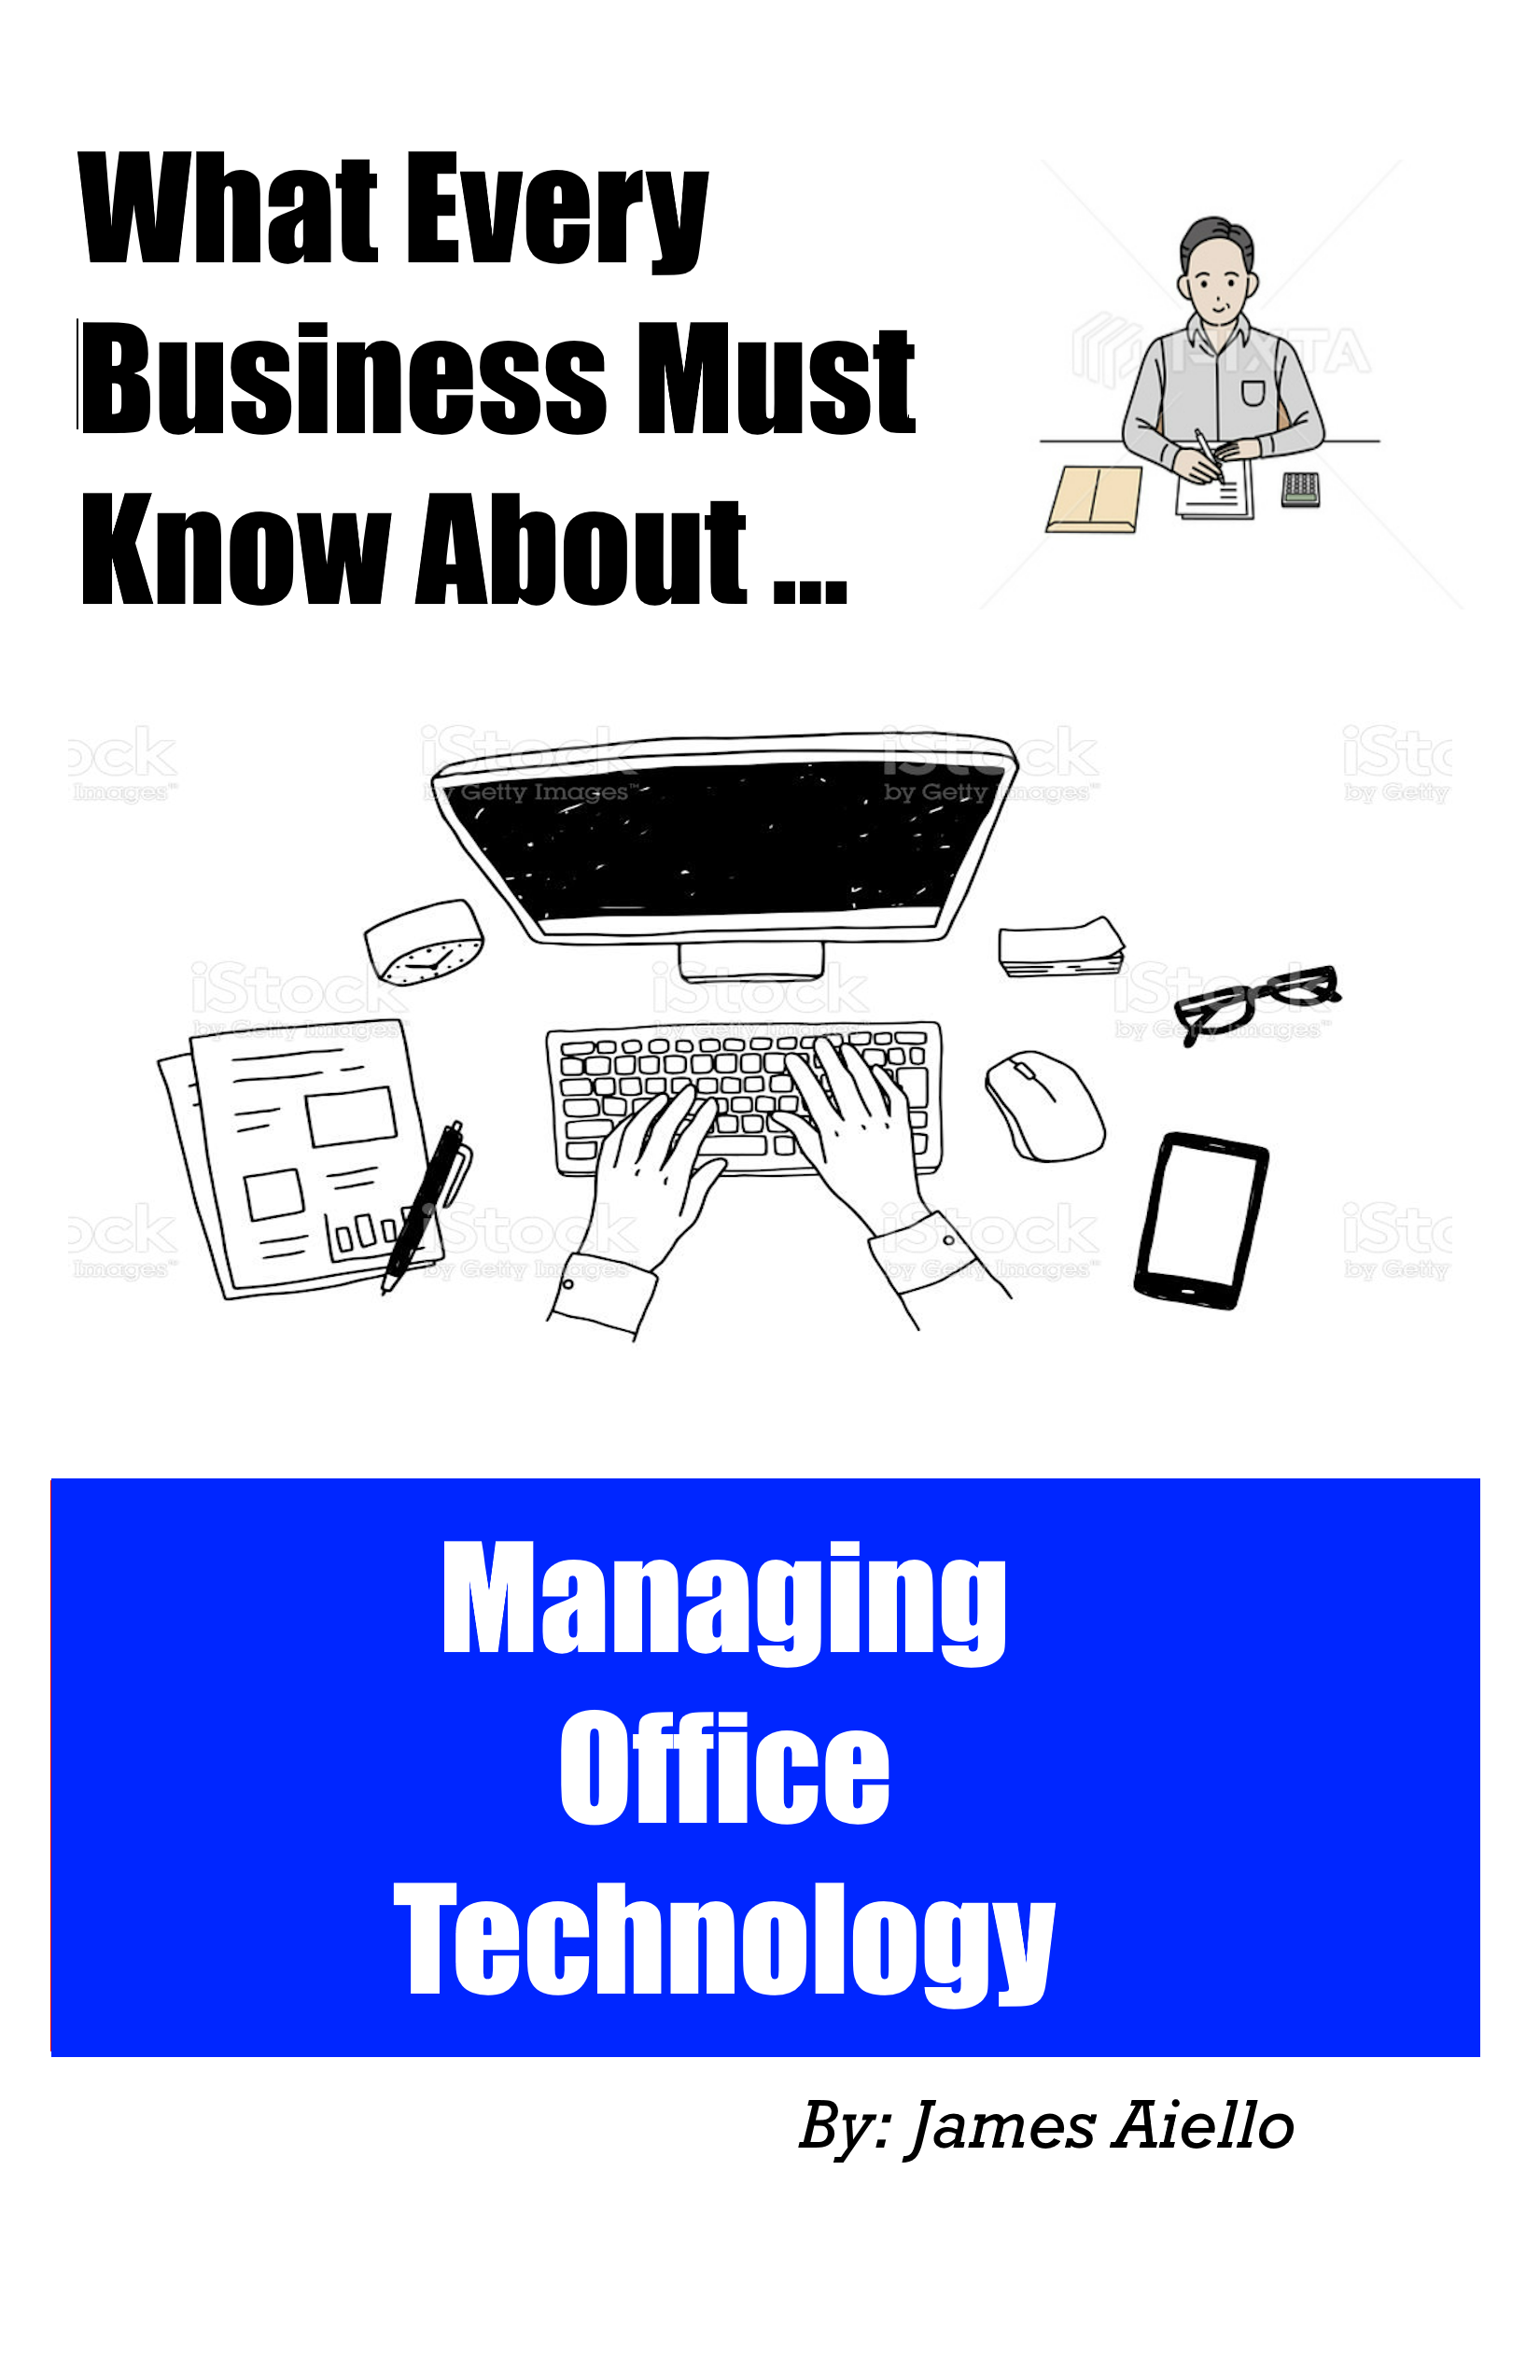 Managing Office Technology